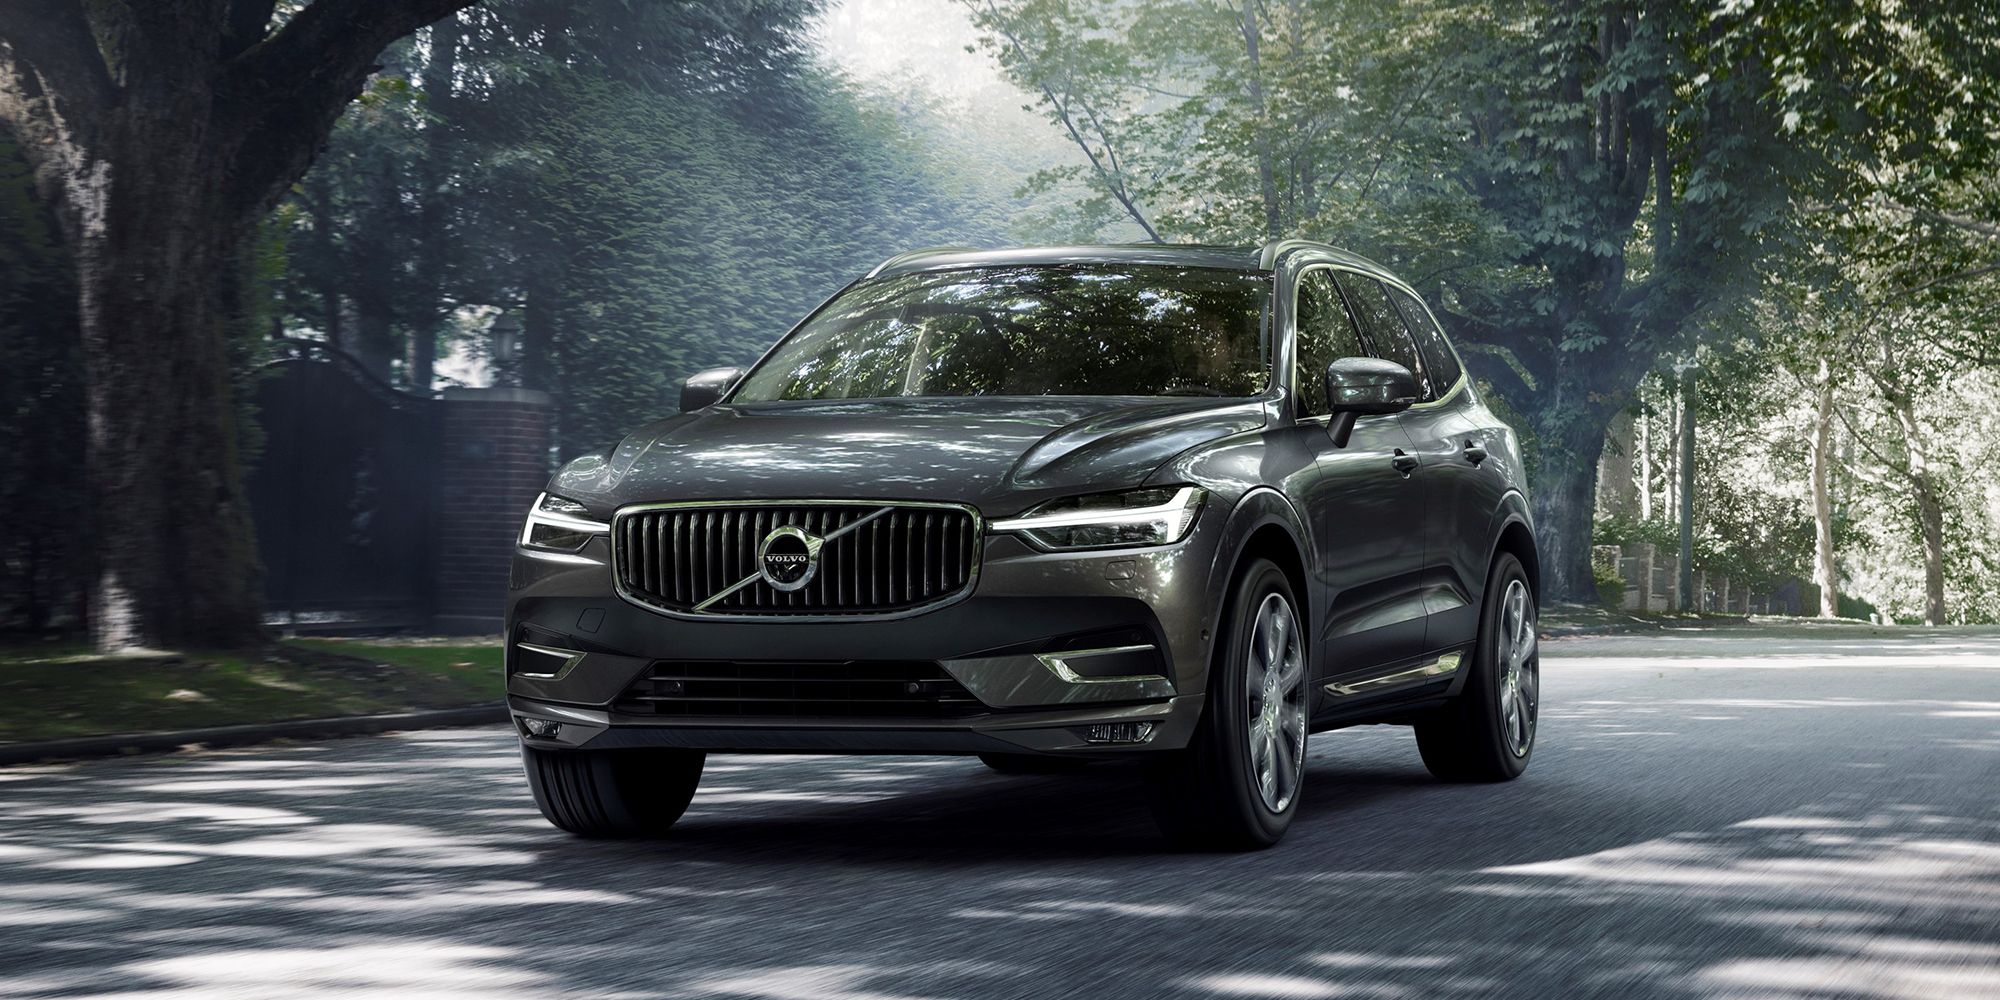 The front of the Volvo XC90